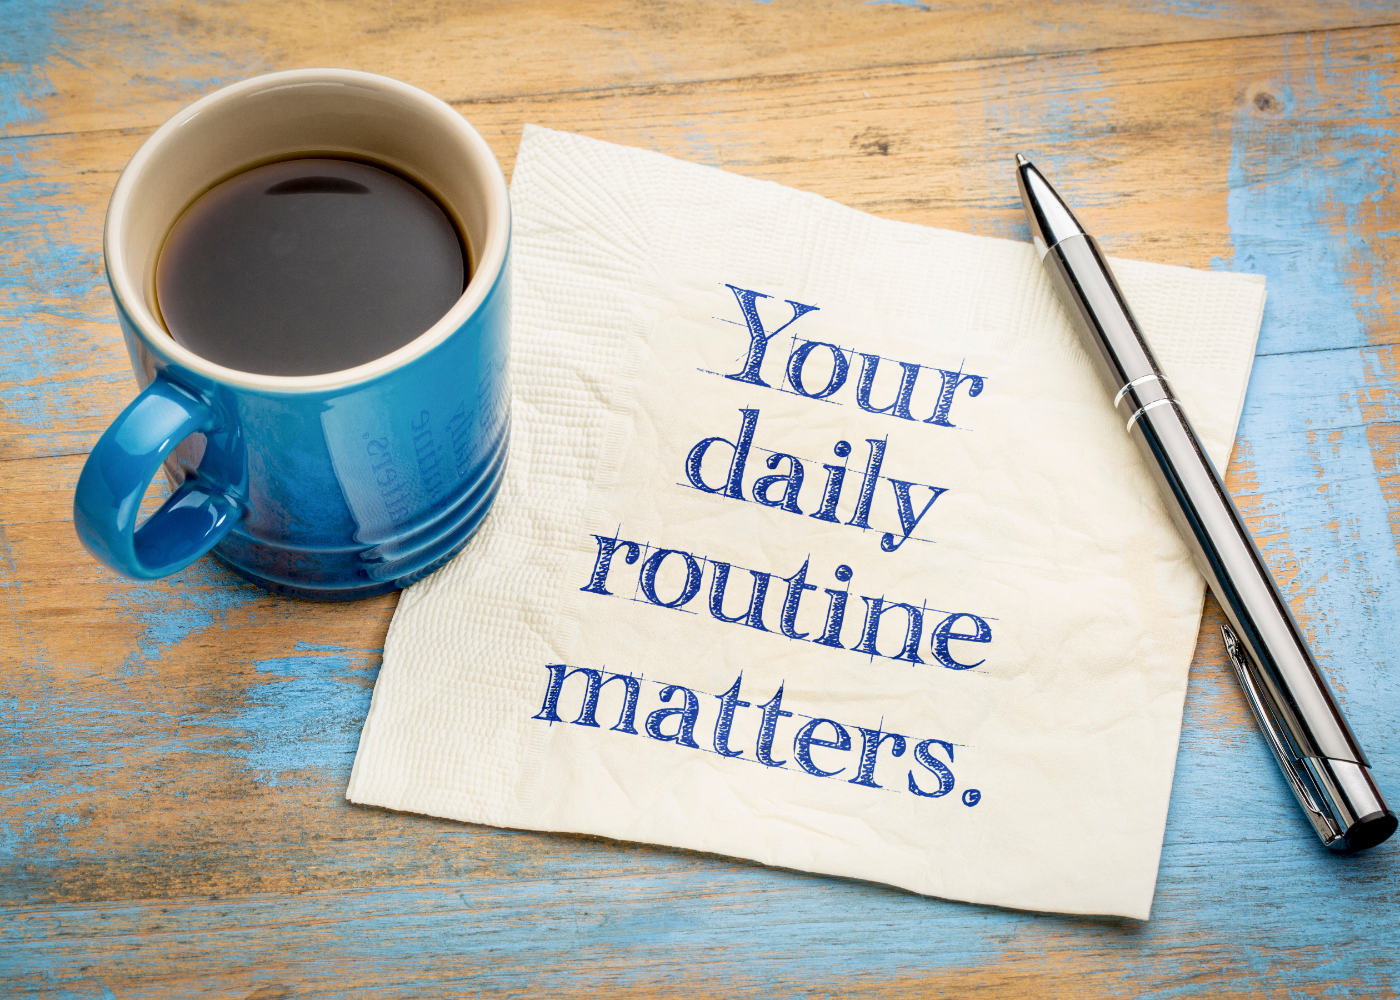 start-of-the-workday routine matters